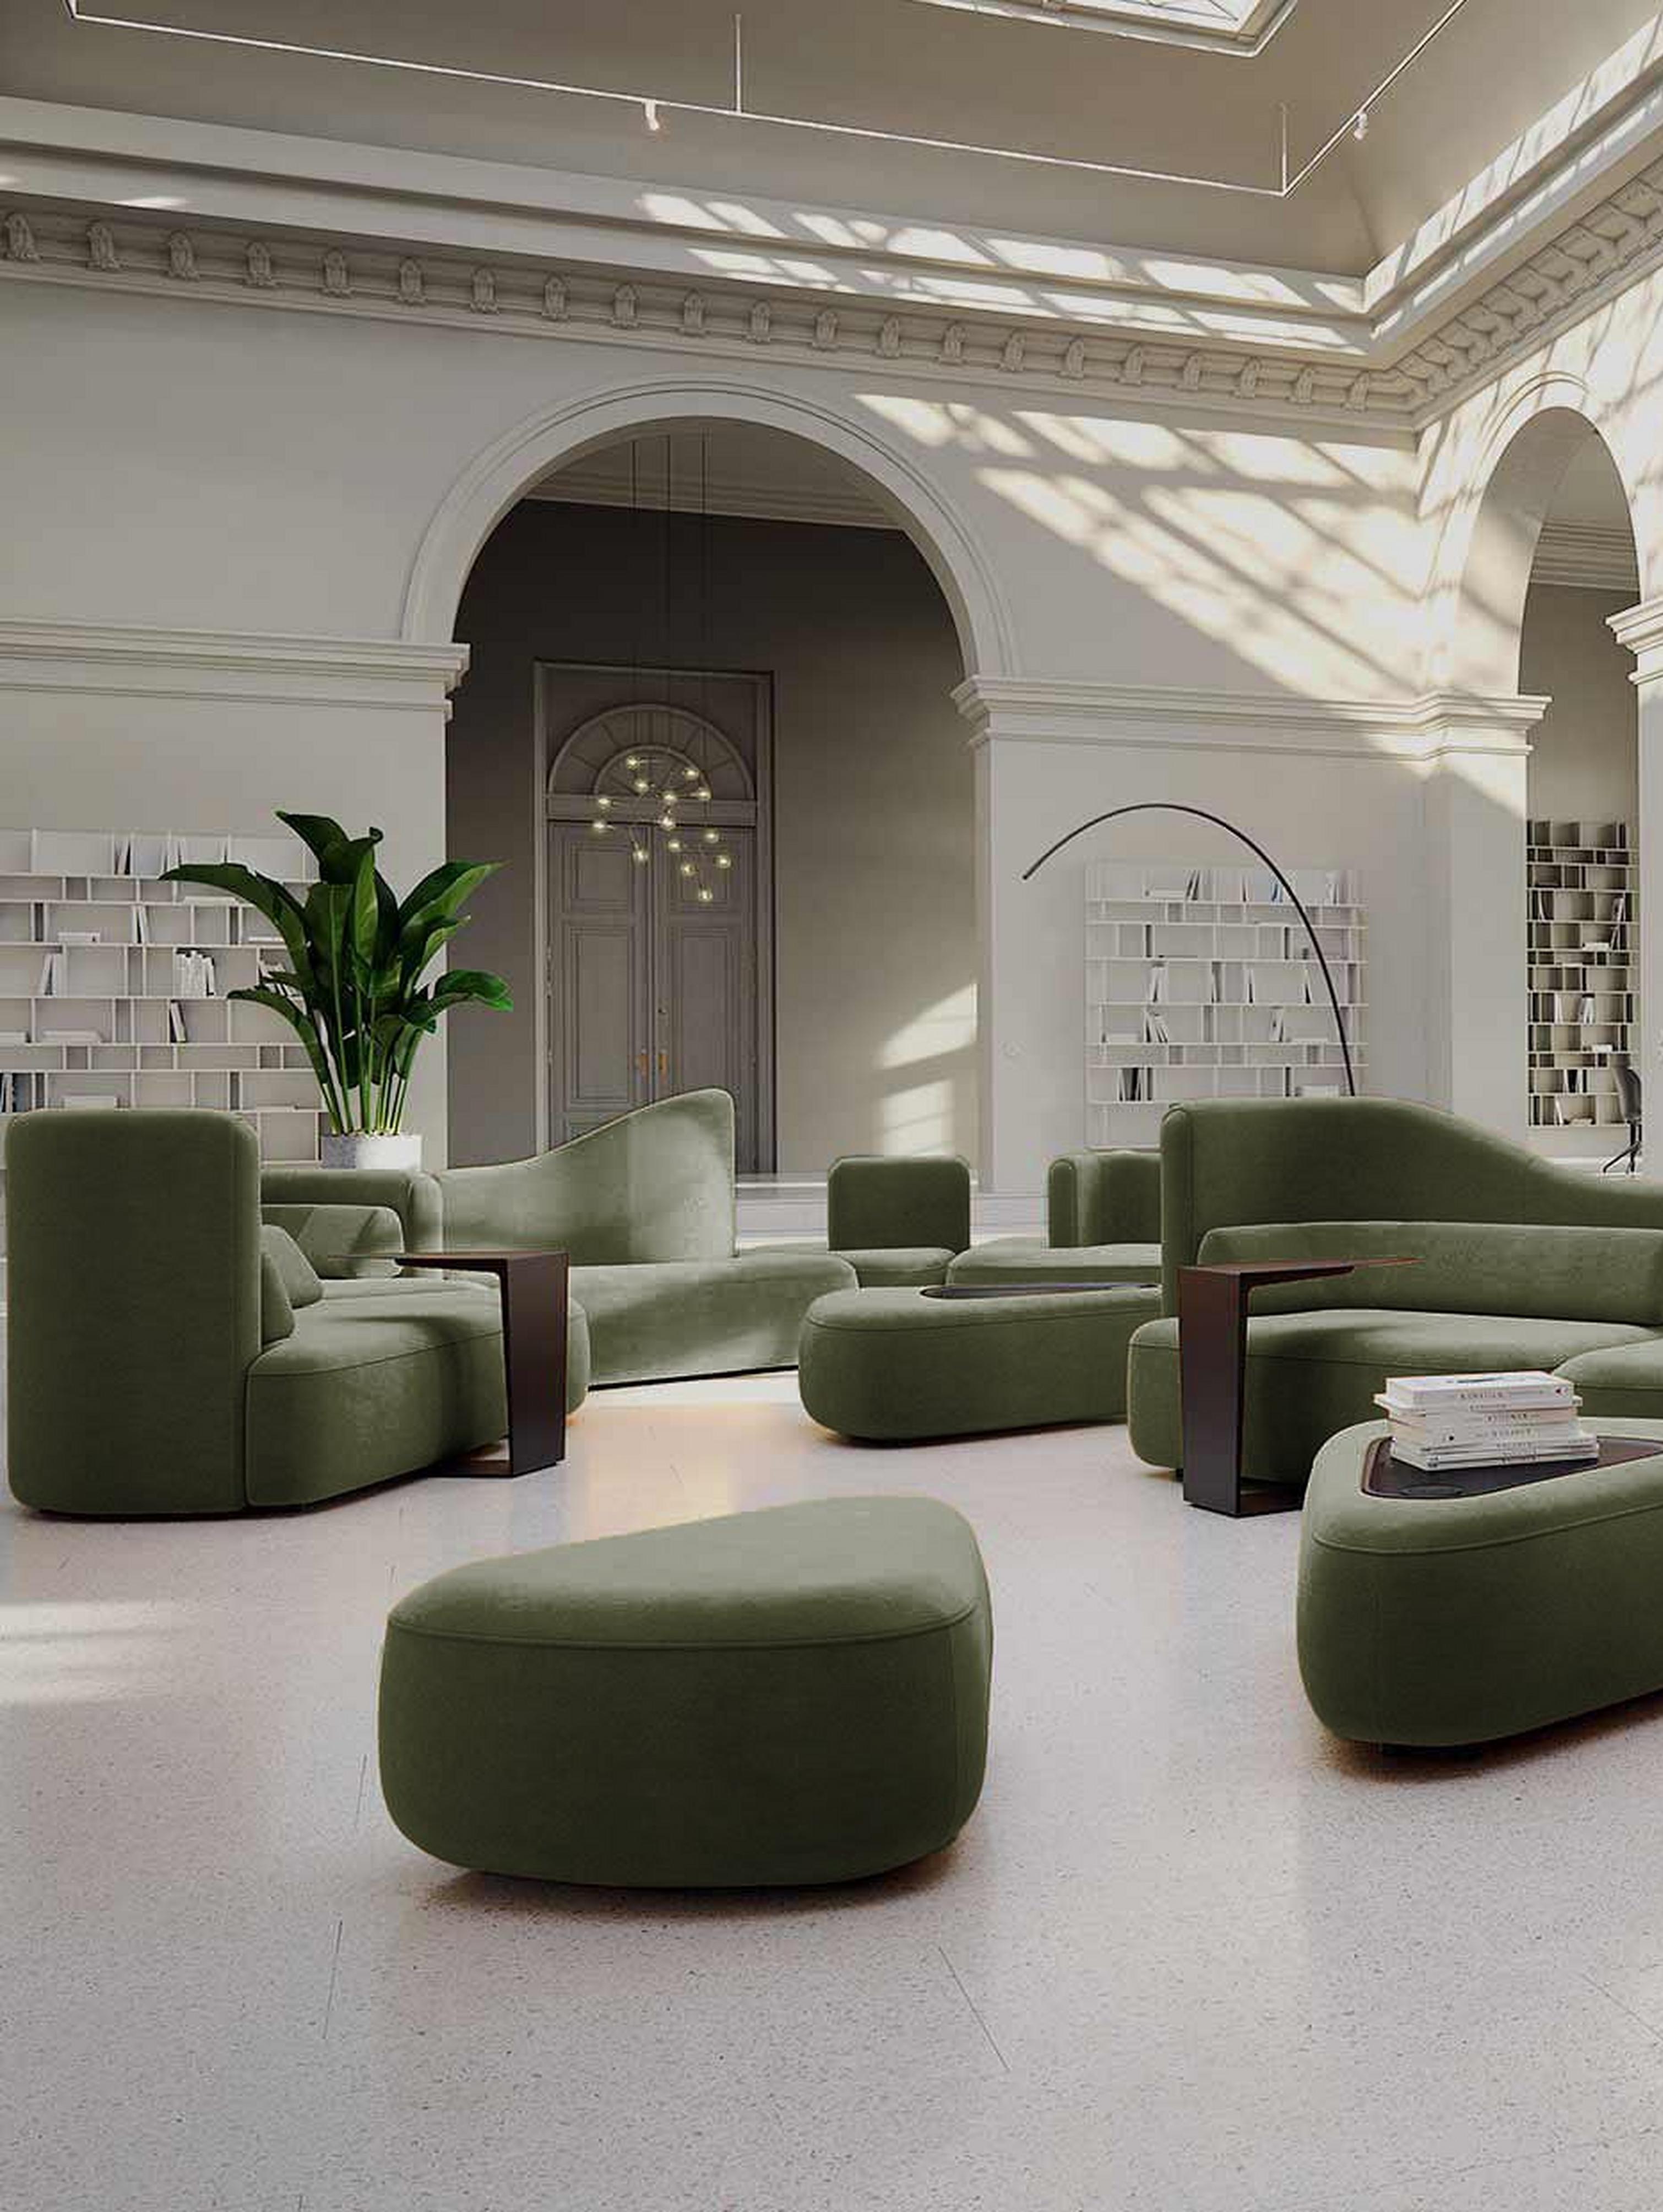 Spacious room with green sofas, white columns, arches, and potted plants in a bright setting.